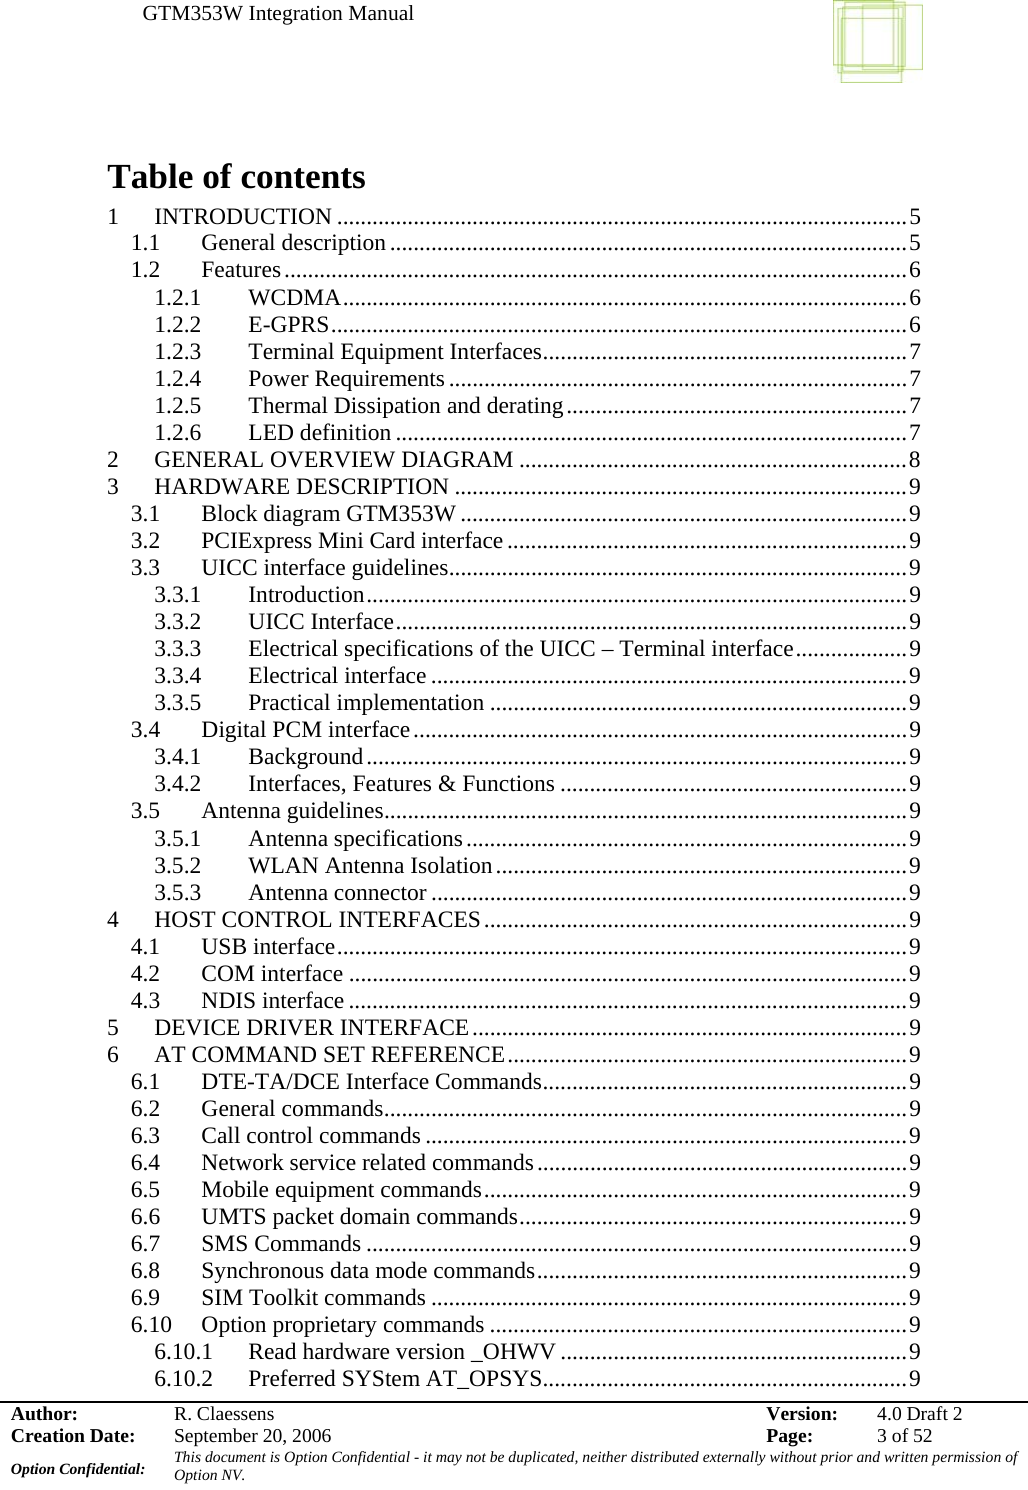 GTM353W Integration Manual      Author: R. Claessens  Version:  4.0 Draft 2Creation Date:  September 20, 2006  Page:  3 of 52 Option Confidential:  This document is Option Confidential - it may not be duplicated, neither distributed externally without prior and written permission of Option NV.    Table of contents 1 INTRODUCTION .................................................................................................5 1.1 General description ........................................................................................5 1.2 Features..........................................................................................................6 1.2.1 WCDMA................................................................................................6 1.2.2 E-GPRS..................................................................................................6 1.2.3  Terminal Equipment Interfaces..............................................................7 1.2.4 Power Requirements..............................................................................7 1.2.5  Thermal Dissipation and derating..........................................................7 1.2.6 LED definition .......................................................................................7 2  GENERAL OVERVIEW DIAGRAM ..................................................................8 3 HARDWARE DESCRIPTION .............................................................................9 3.1  Block diagram GTM353W ............................................................................9 3.2  PCIExpress Mini Card interface....................................................................9 3.3  UICC interface guidelines..............................................................................9 3.3.1 Introduction............................................................................................9 3.3.2 UICC Interface.......................................................................................9 3.3.3  Electrical specifications of the UICC – Terminal interface...................9 3.3.4 Electrical interface .................................................................................9 3.3.5 Practical implementation .......................................................................9 3.4  Digital PCM interface....................................................................................9 3.4.1 Background............................................................................................9 3.4.2  Interfaces, Features &amp; Functions ...........................................................9 3.5 Antenna guidelines.........................................................................................9 3.5.1 Antenna specifications...........................................................................9 3.5.2 WLAN Antenna Isolation......................................................................9 3.5.3 Antenna connector .................................................................................9 4  HOST CONTROL INTERFACES........................................................................9 4.1 USB interface.................................................................................................9 4.2 COM interface ...............................................................................................9 4.3 NDIS interface ...............................................................................................9 5  DEVICE DRIVER INTERFACE..........................................................................9 6  AT COMMAND SET REFERENCE....................................................................9 6.1  DTE-TA/DCE Interface Commands..............................................................9 6.2 General commands.........................................................................................9 6.3  Call control commands ..................................................................................9 6.4  Network service related commands...............................................................9 6.5 Mobile equipment commands........................................................................9 6.6  UMTS packet domain commands..................................................................9 6.7 SMS Commands ............................................................................................9 6.8 Synchronous data mode commands...............................................................9 6.9  SIM Toolkit commands .................................................................................9 6.10  Option proprietary commands .......................................................................9 6.10.1  Read hardware version _OHWV ...........................................................9 6.10.2  Preferred SYStem AT_OPSYS..............................................................9 